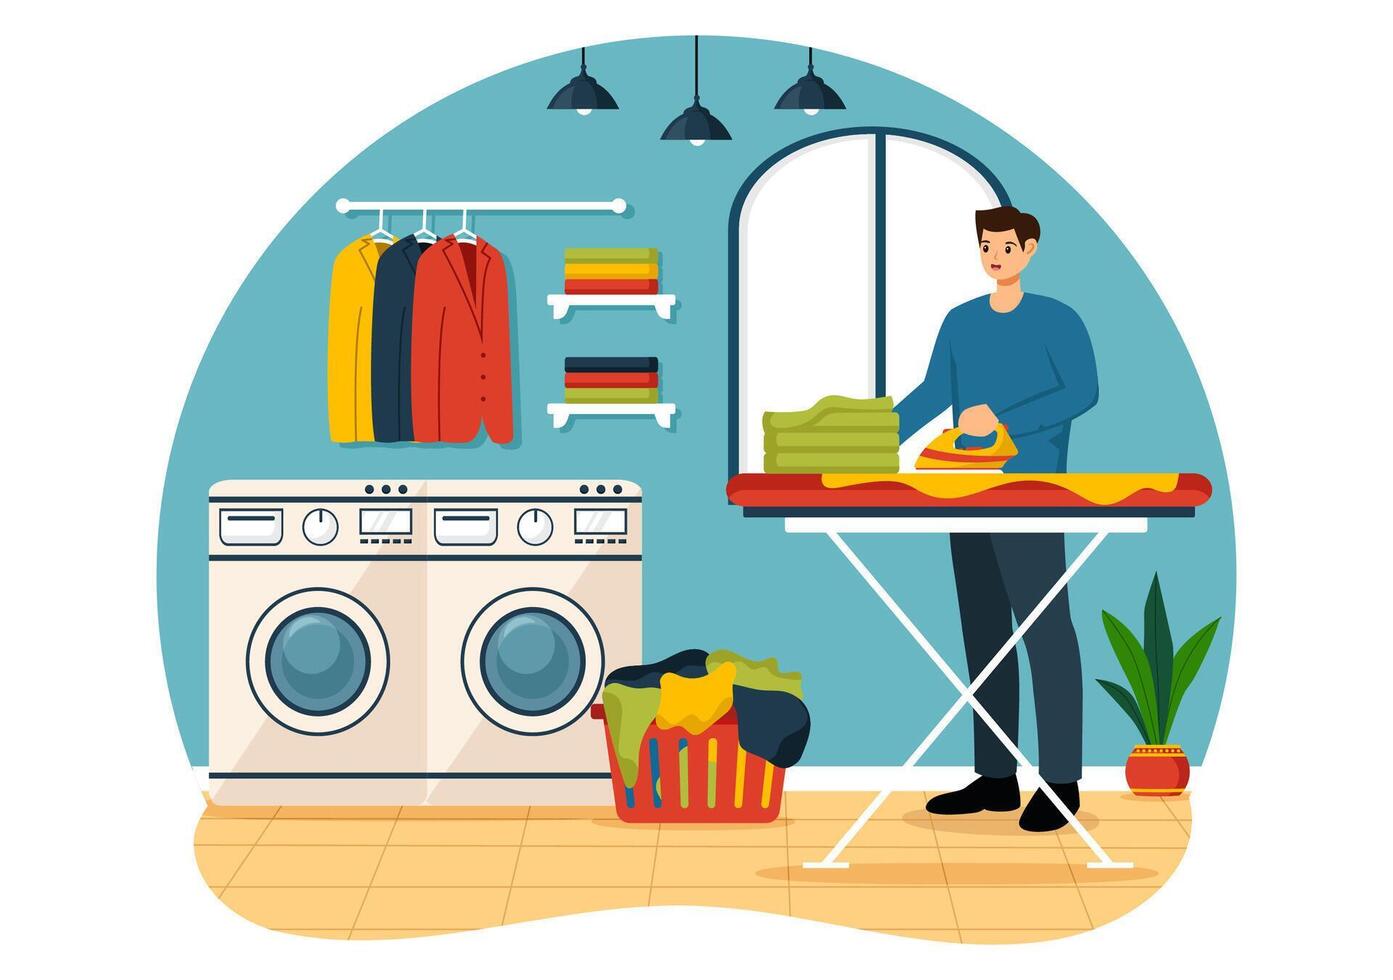 Dry Cleaning Store Service Illustration with Washing Machines, Dryers and Laundry for Clean Clothing in Flat Cartoon Background Design vector